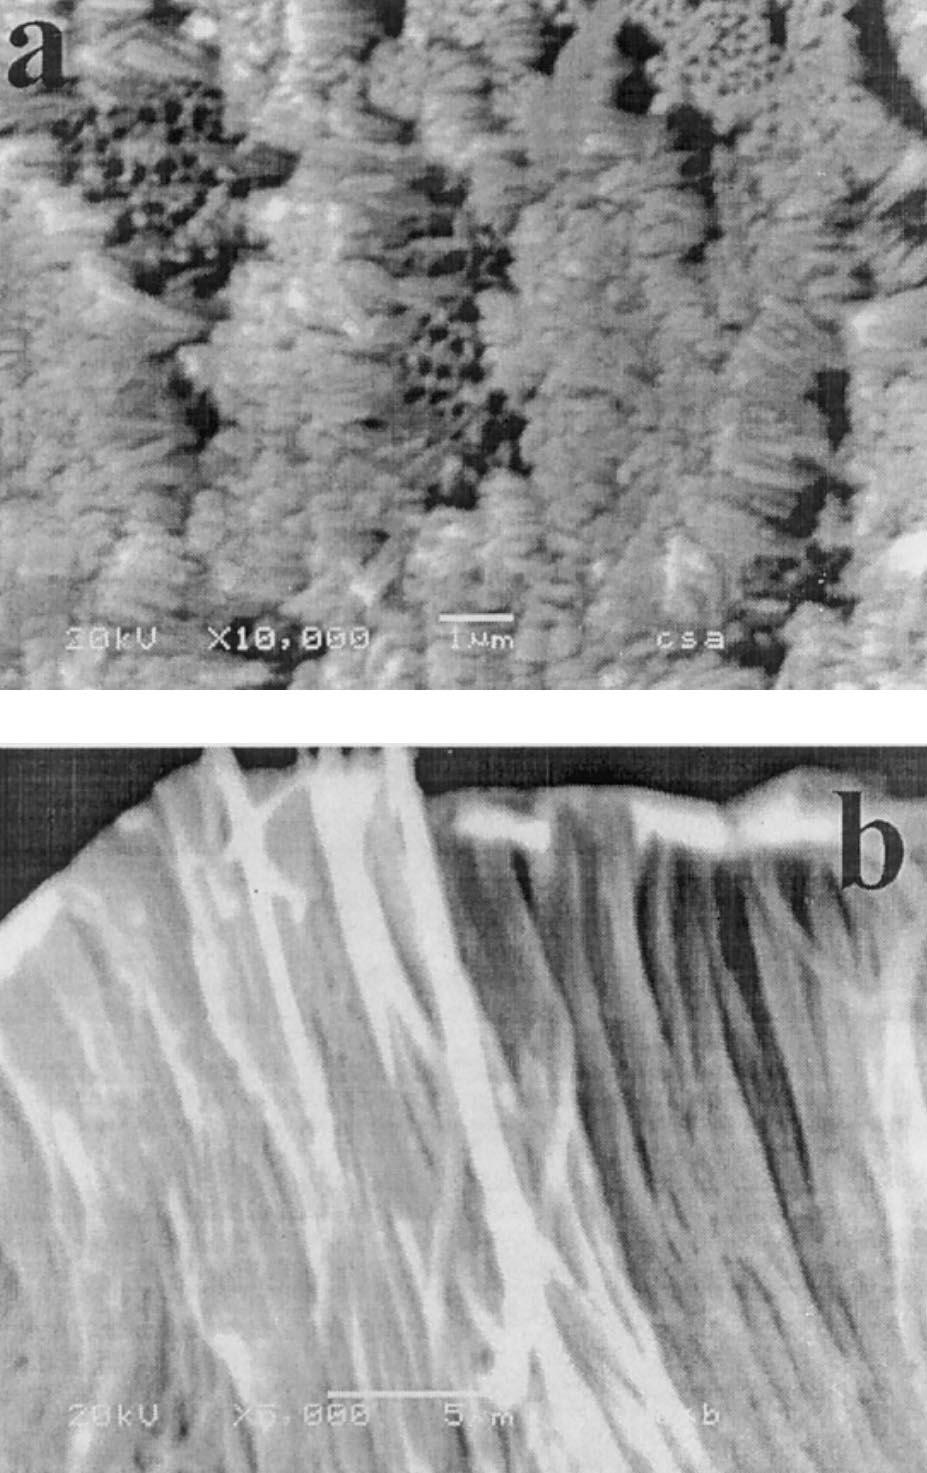 A typical morphology of the CdSe nanorods prepared by dc potentiostatic electrodeposition in AAO template is shown in the SEM image in Fig. 3.